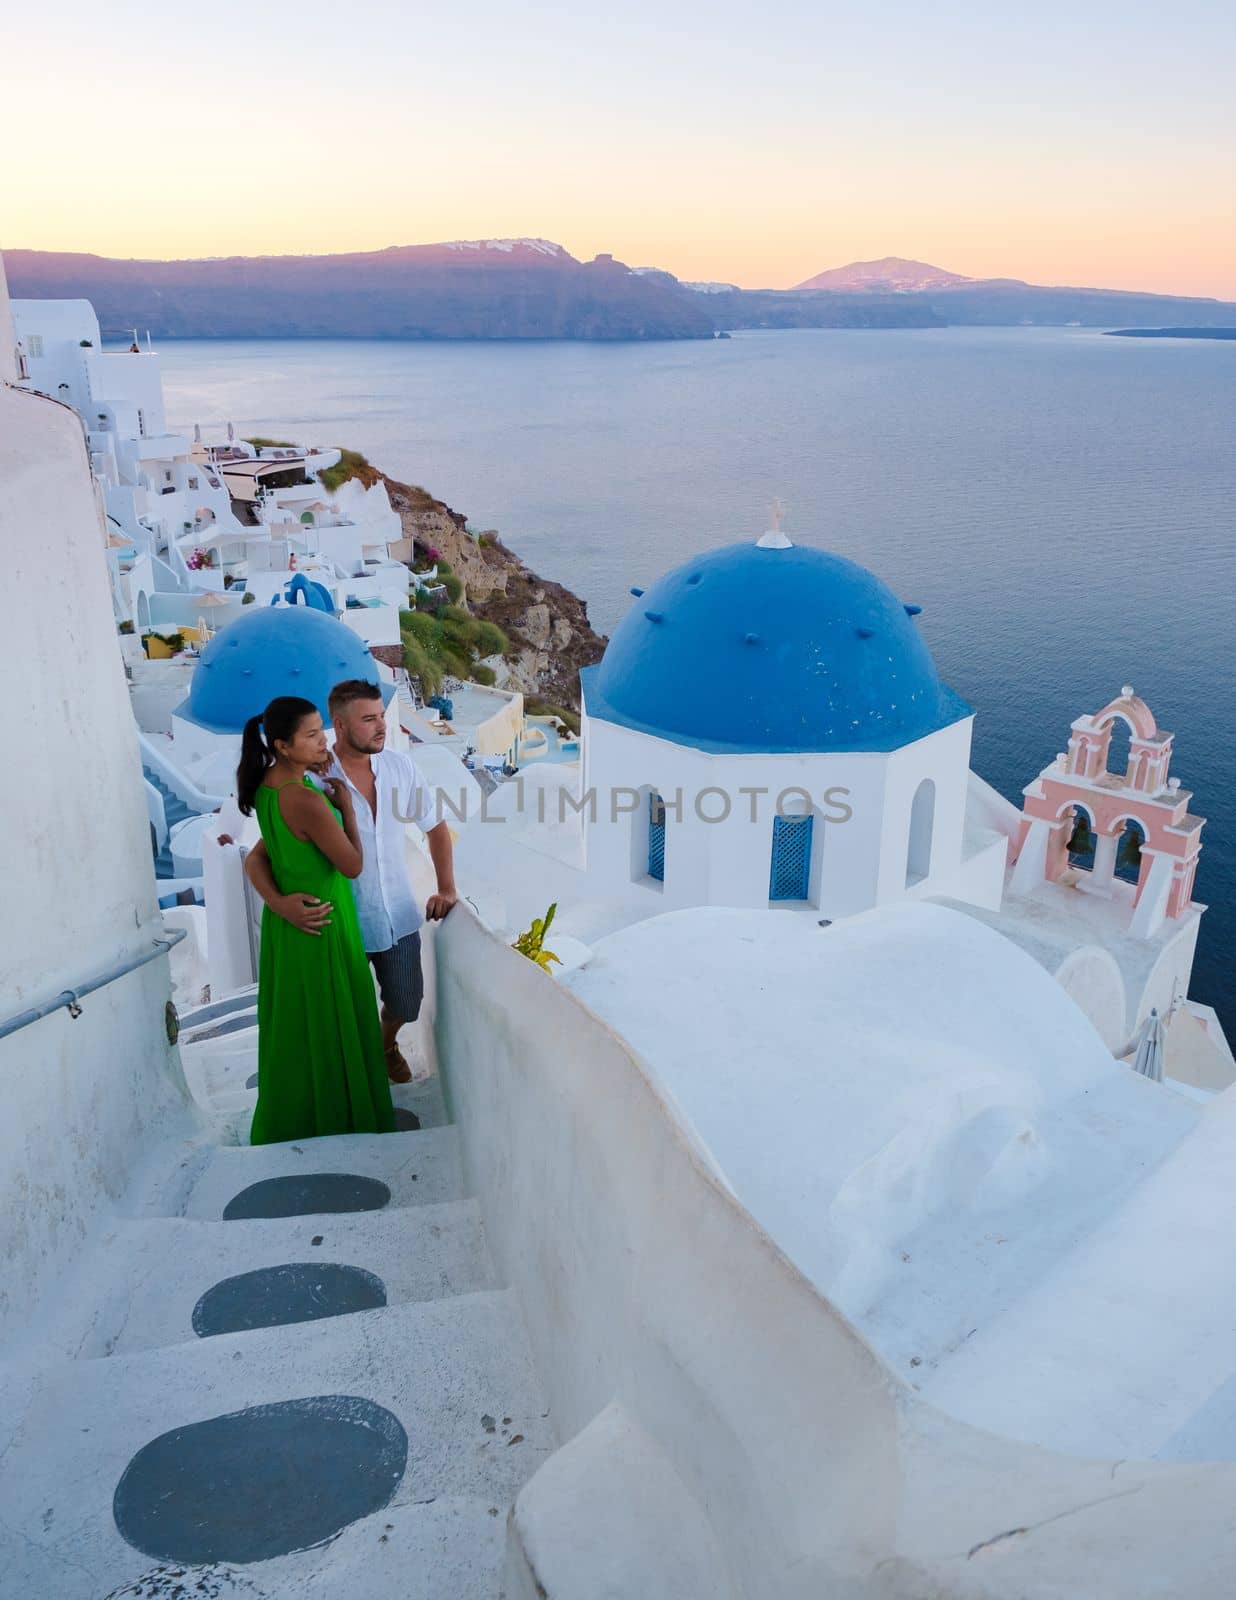 Couple on vacation in Santorini Greece, men and women visit the whitewashed Greek village of Oia during summer vacation on a sunny day